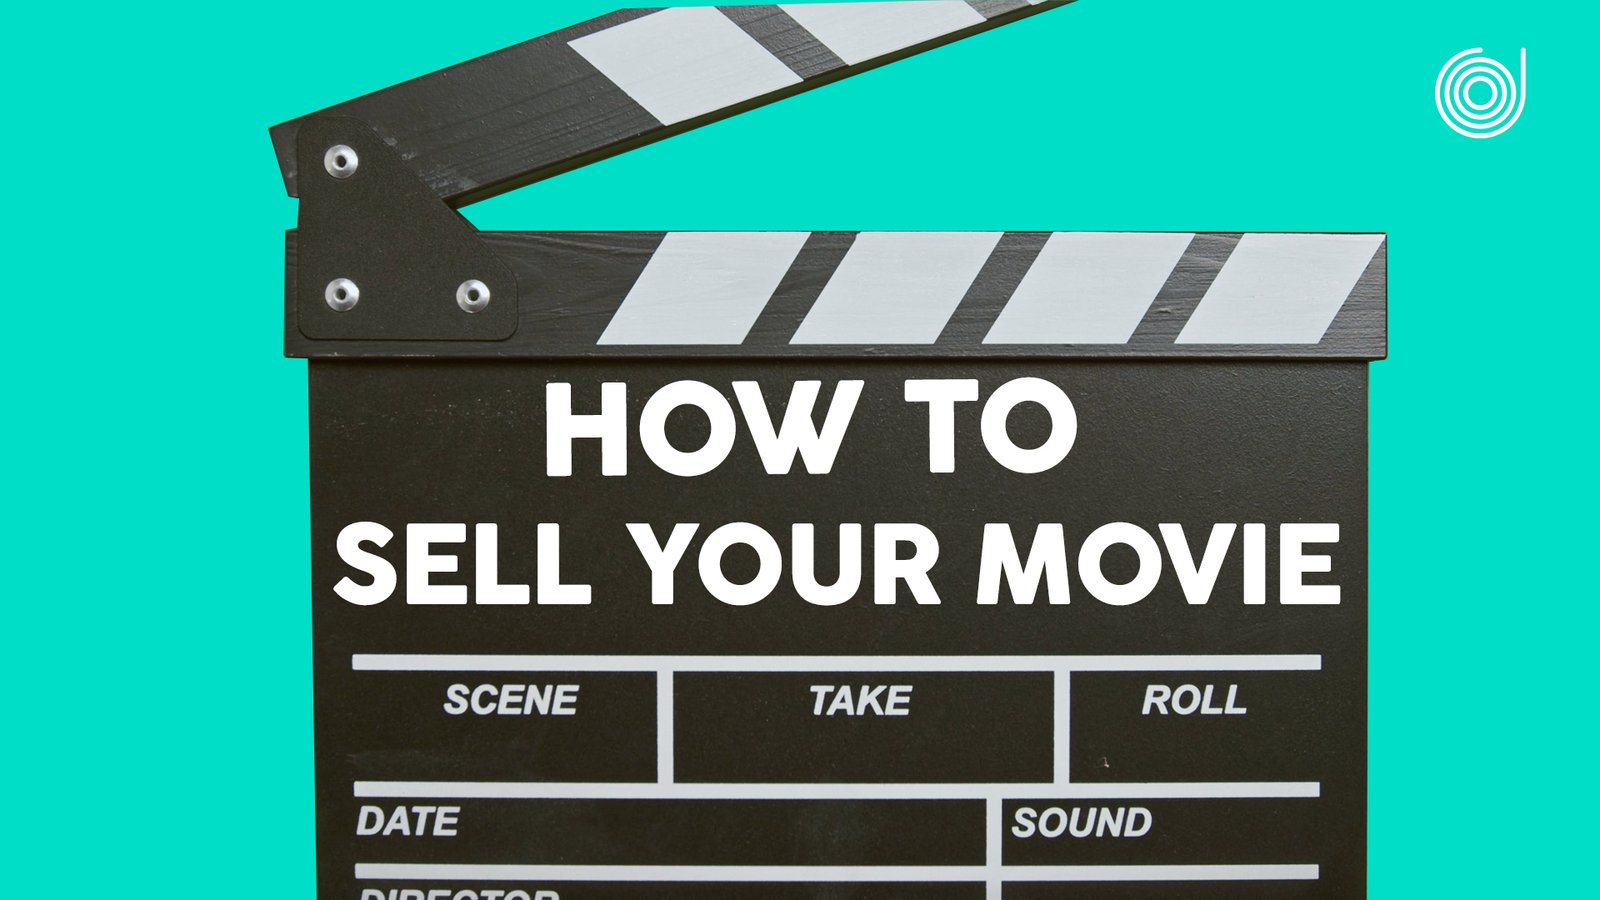 How to sell your movie